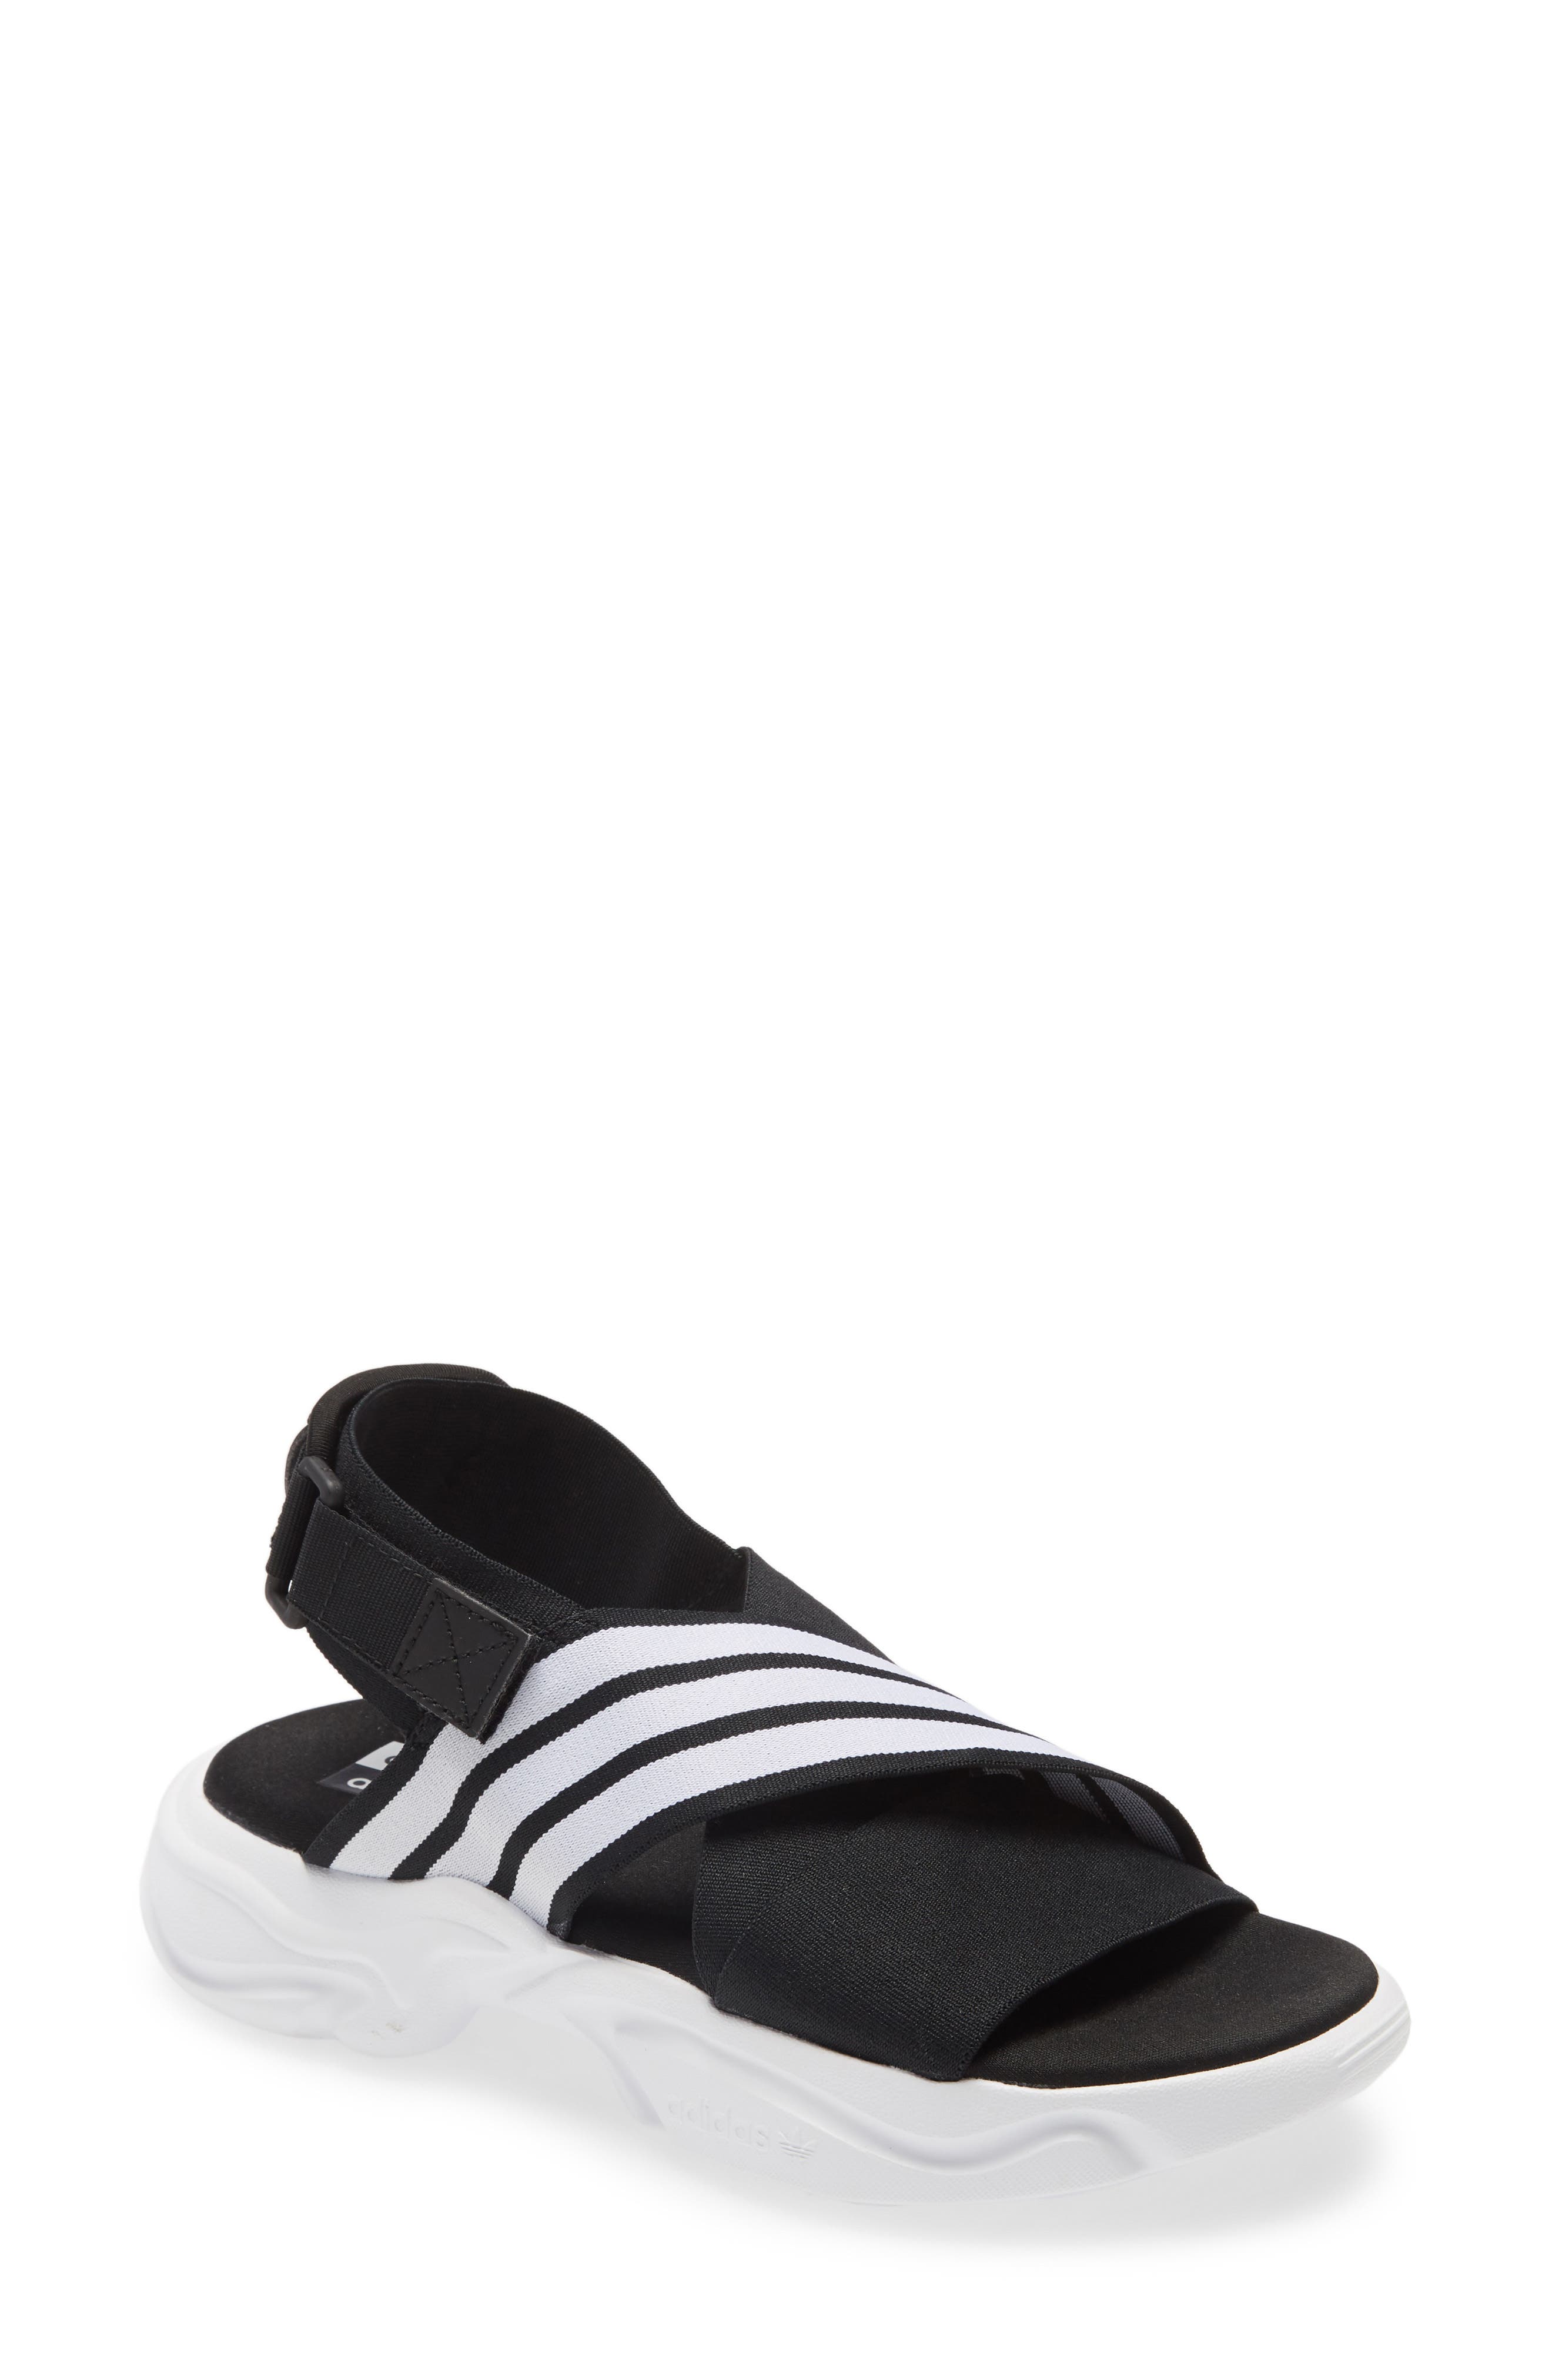 sandals for women adidas